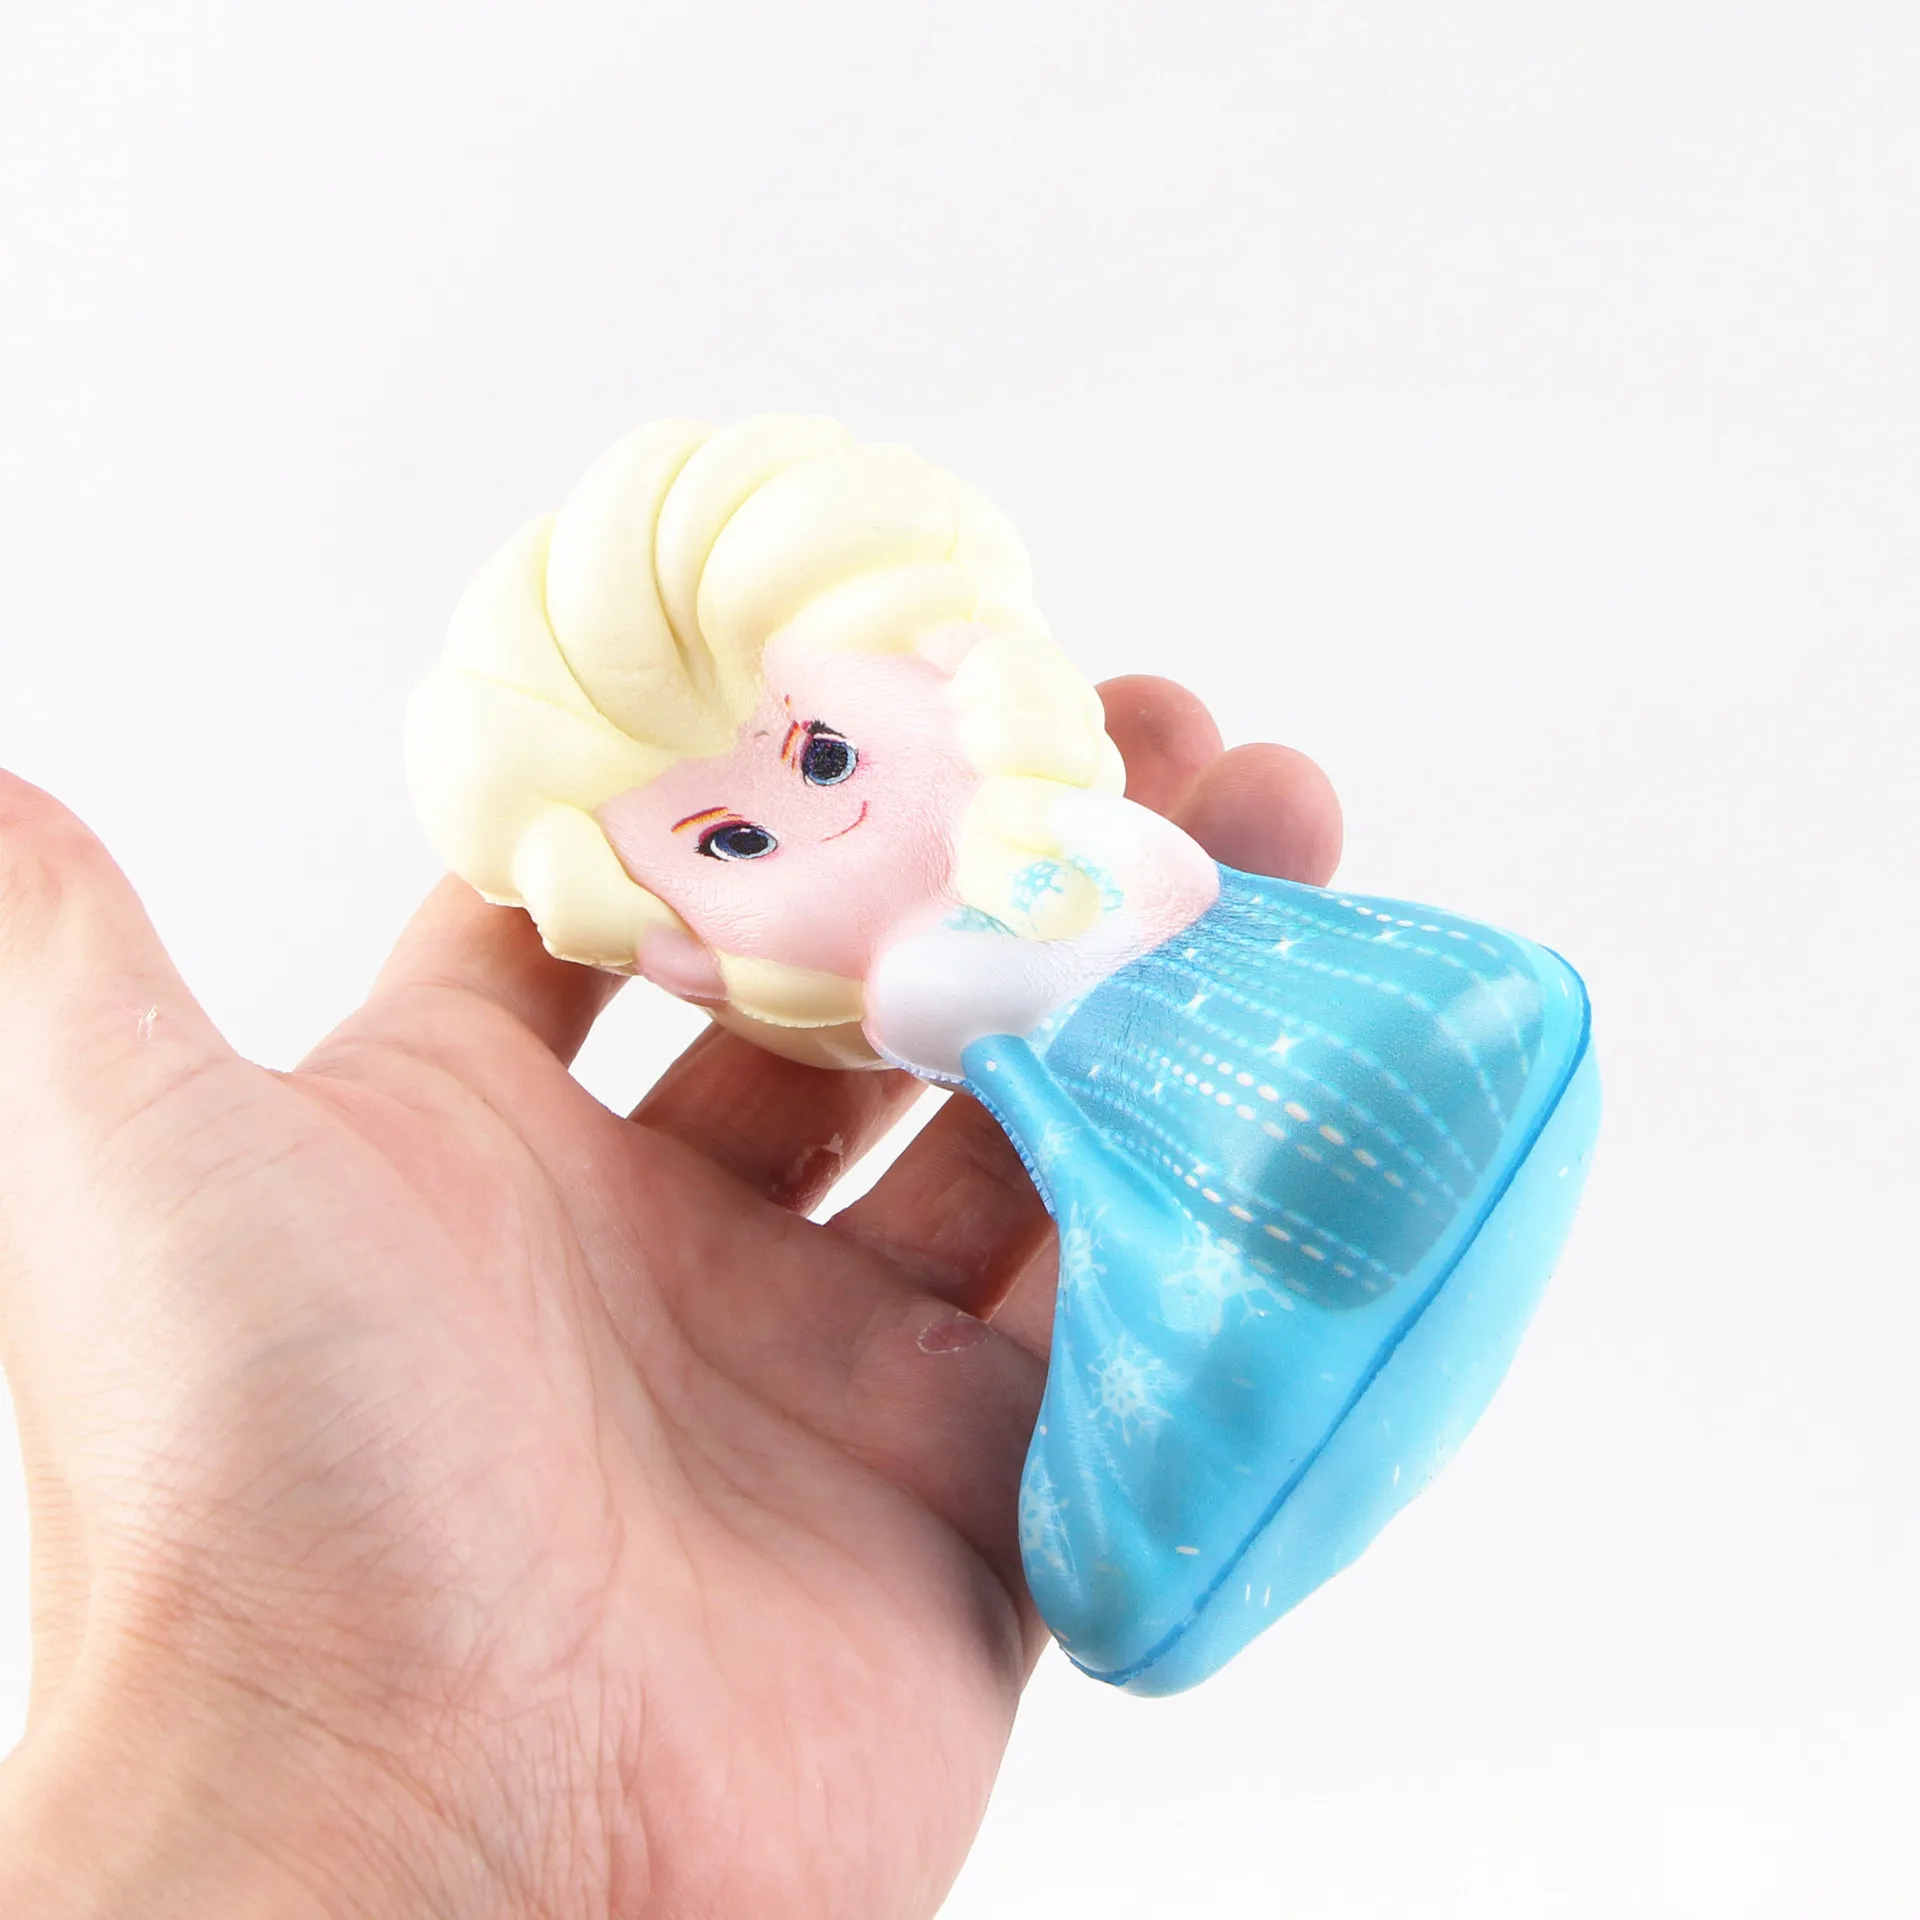 Disney Frozen 2 Elsa Princess Popping Squishy Slow Rising Squish Fidget Toys Kawaii Stress Reliever Squeeze Adult Child PU Toy images - 6